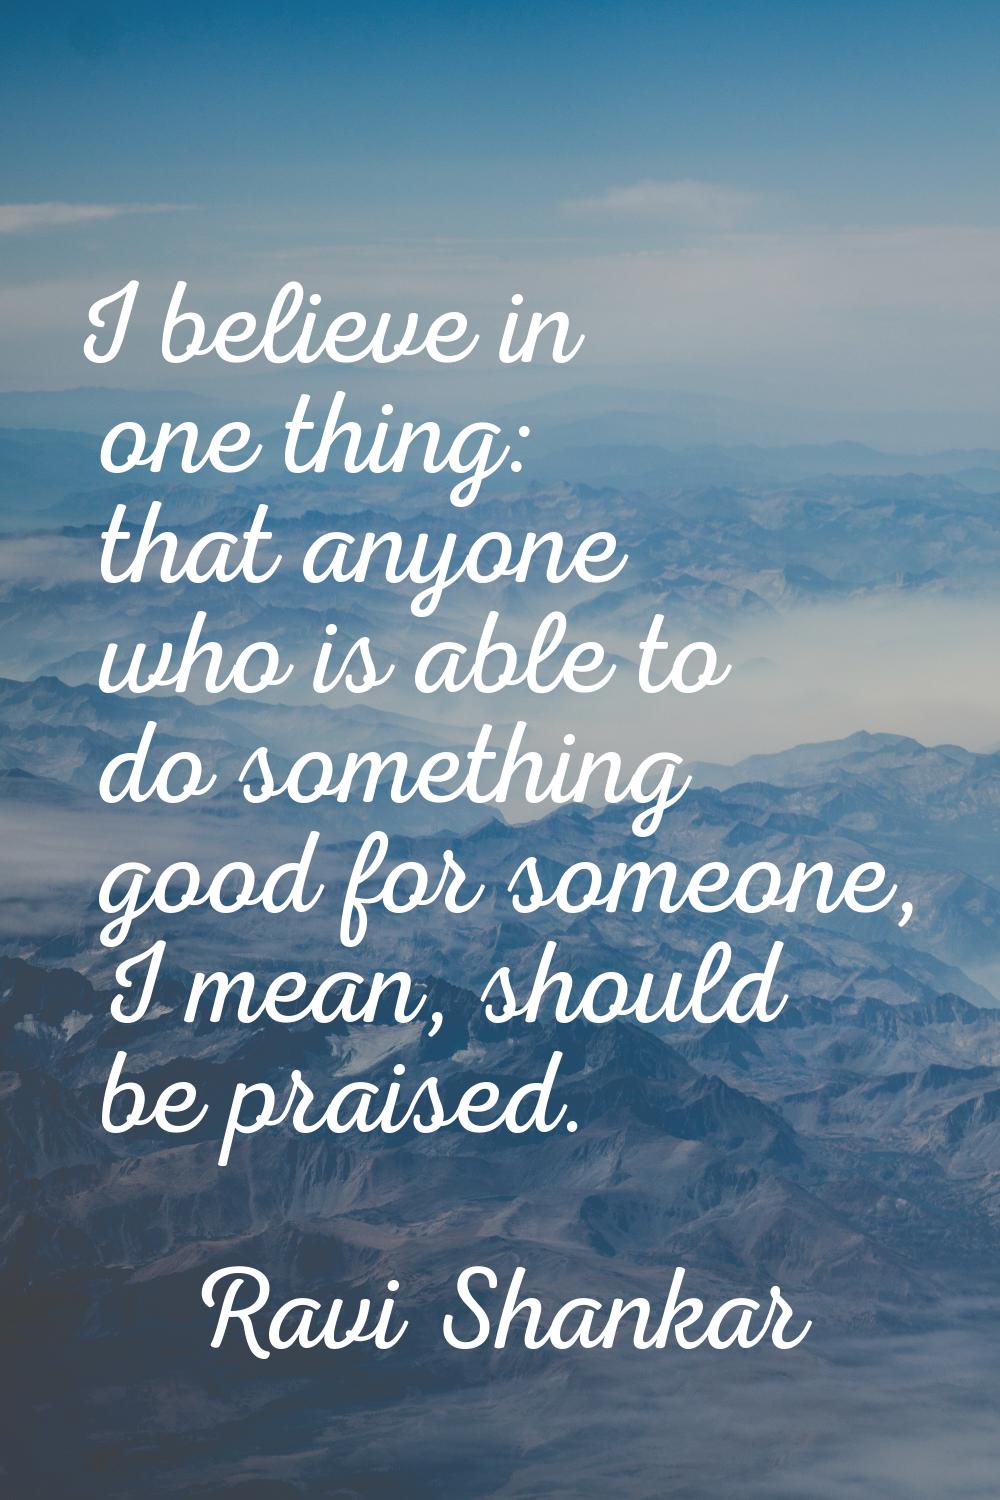 I believe in one thing: that anyone who is able to do something good for someone, I mean, should be